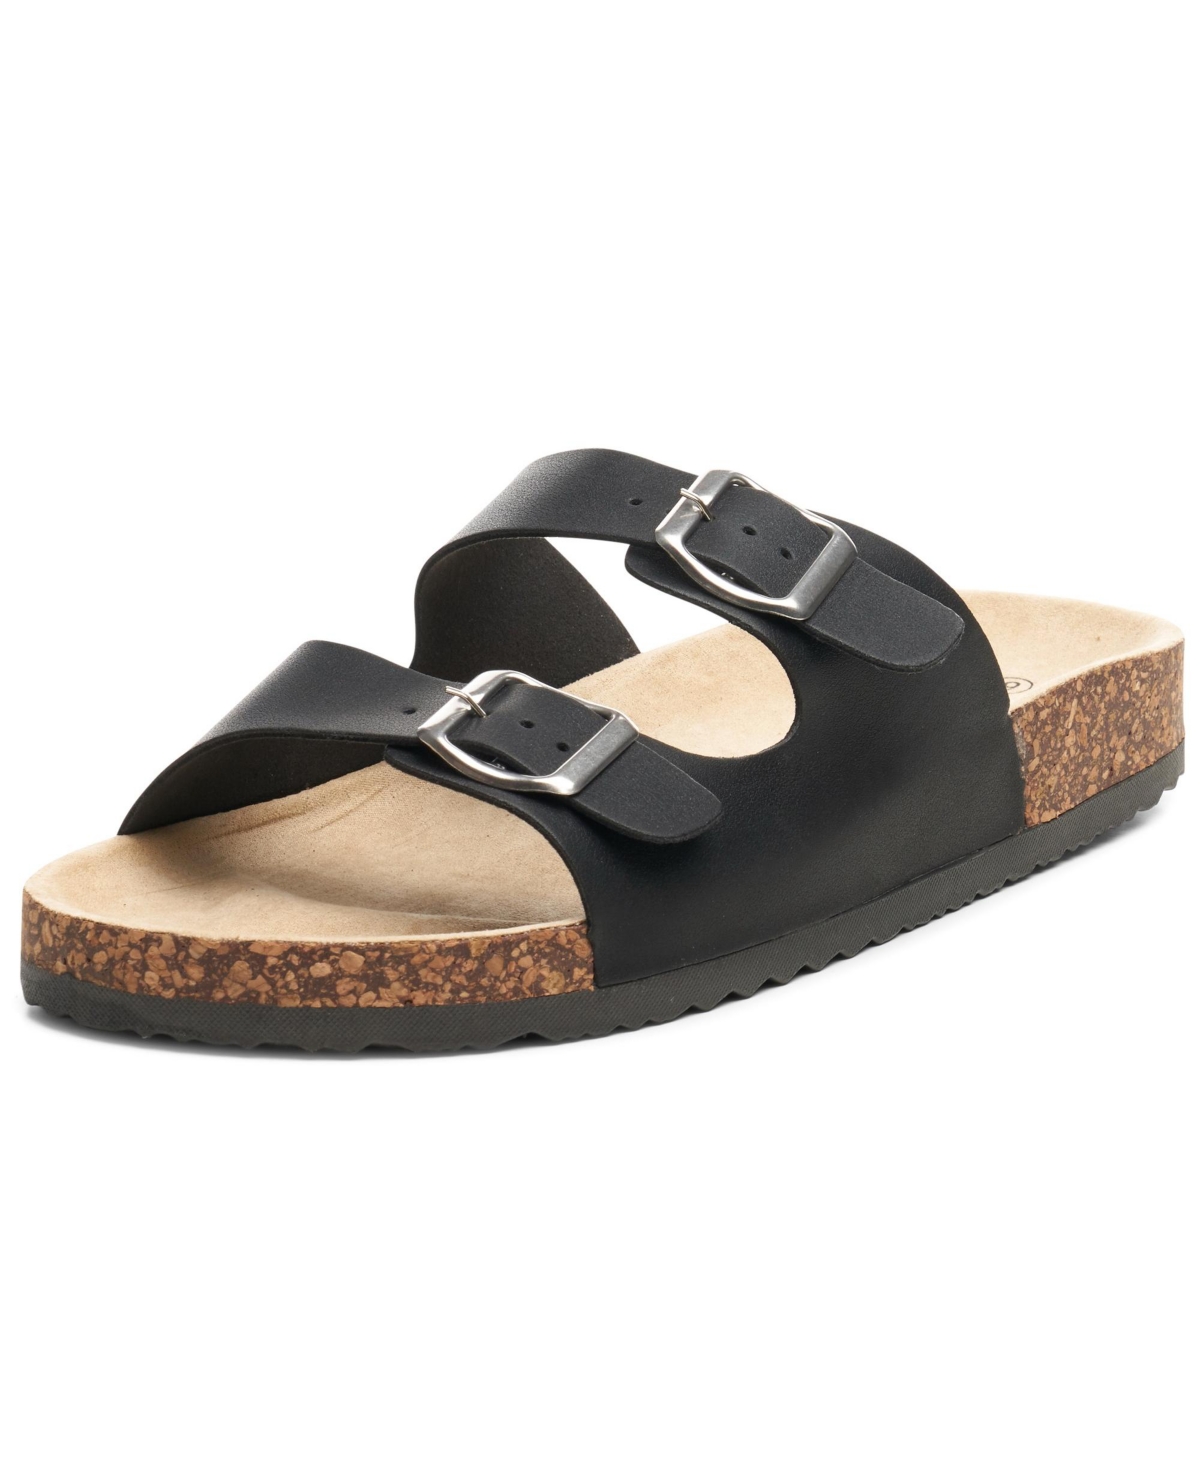 Mens Double Strap Casual Slides Flat Sandals - Brown